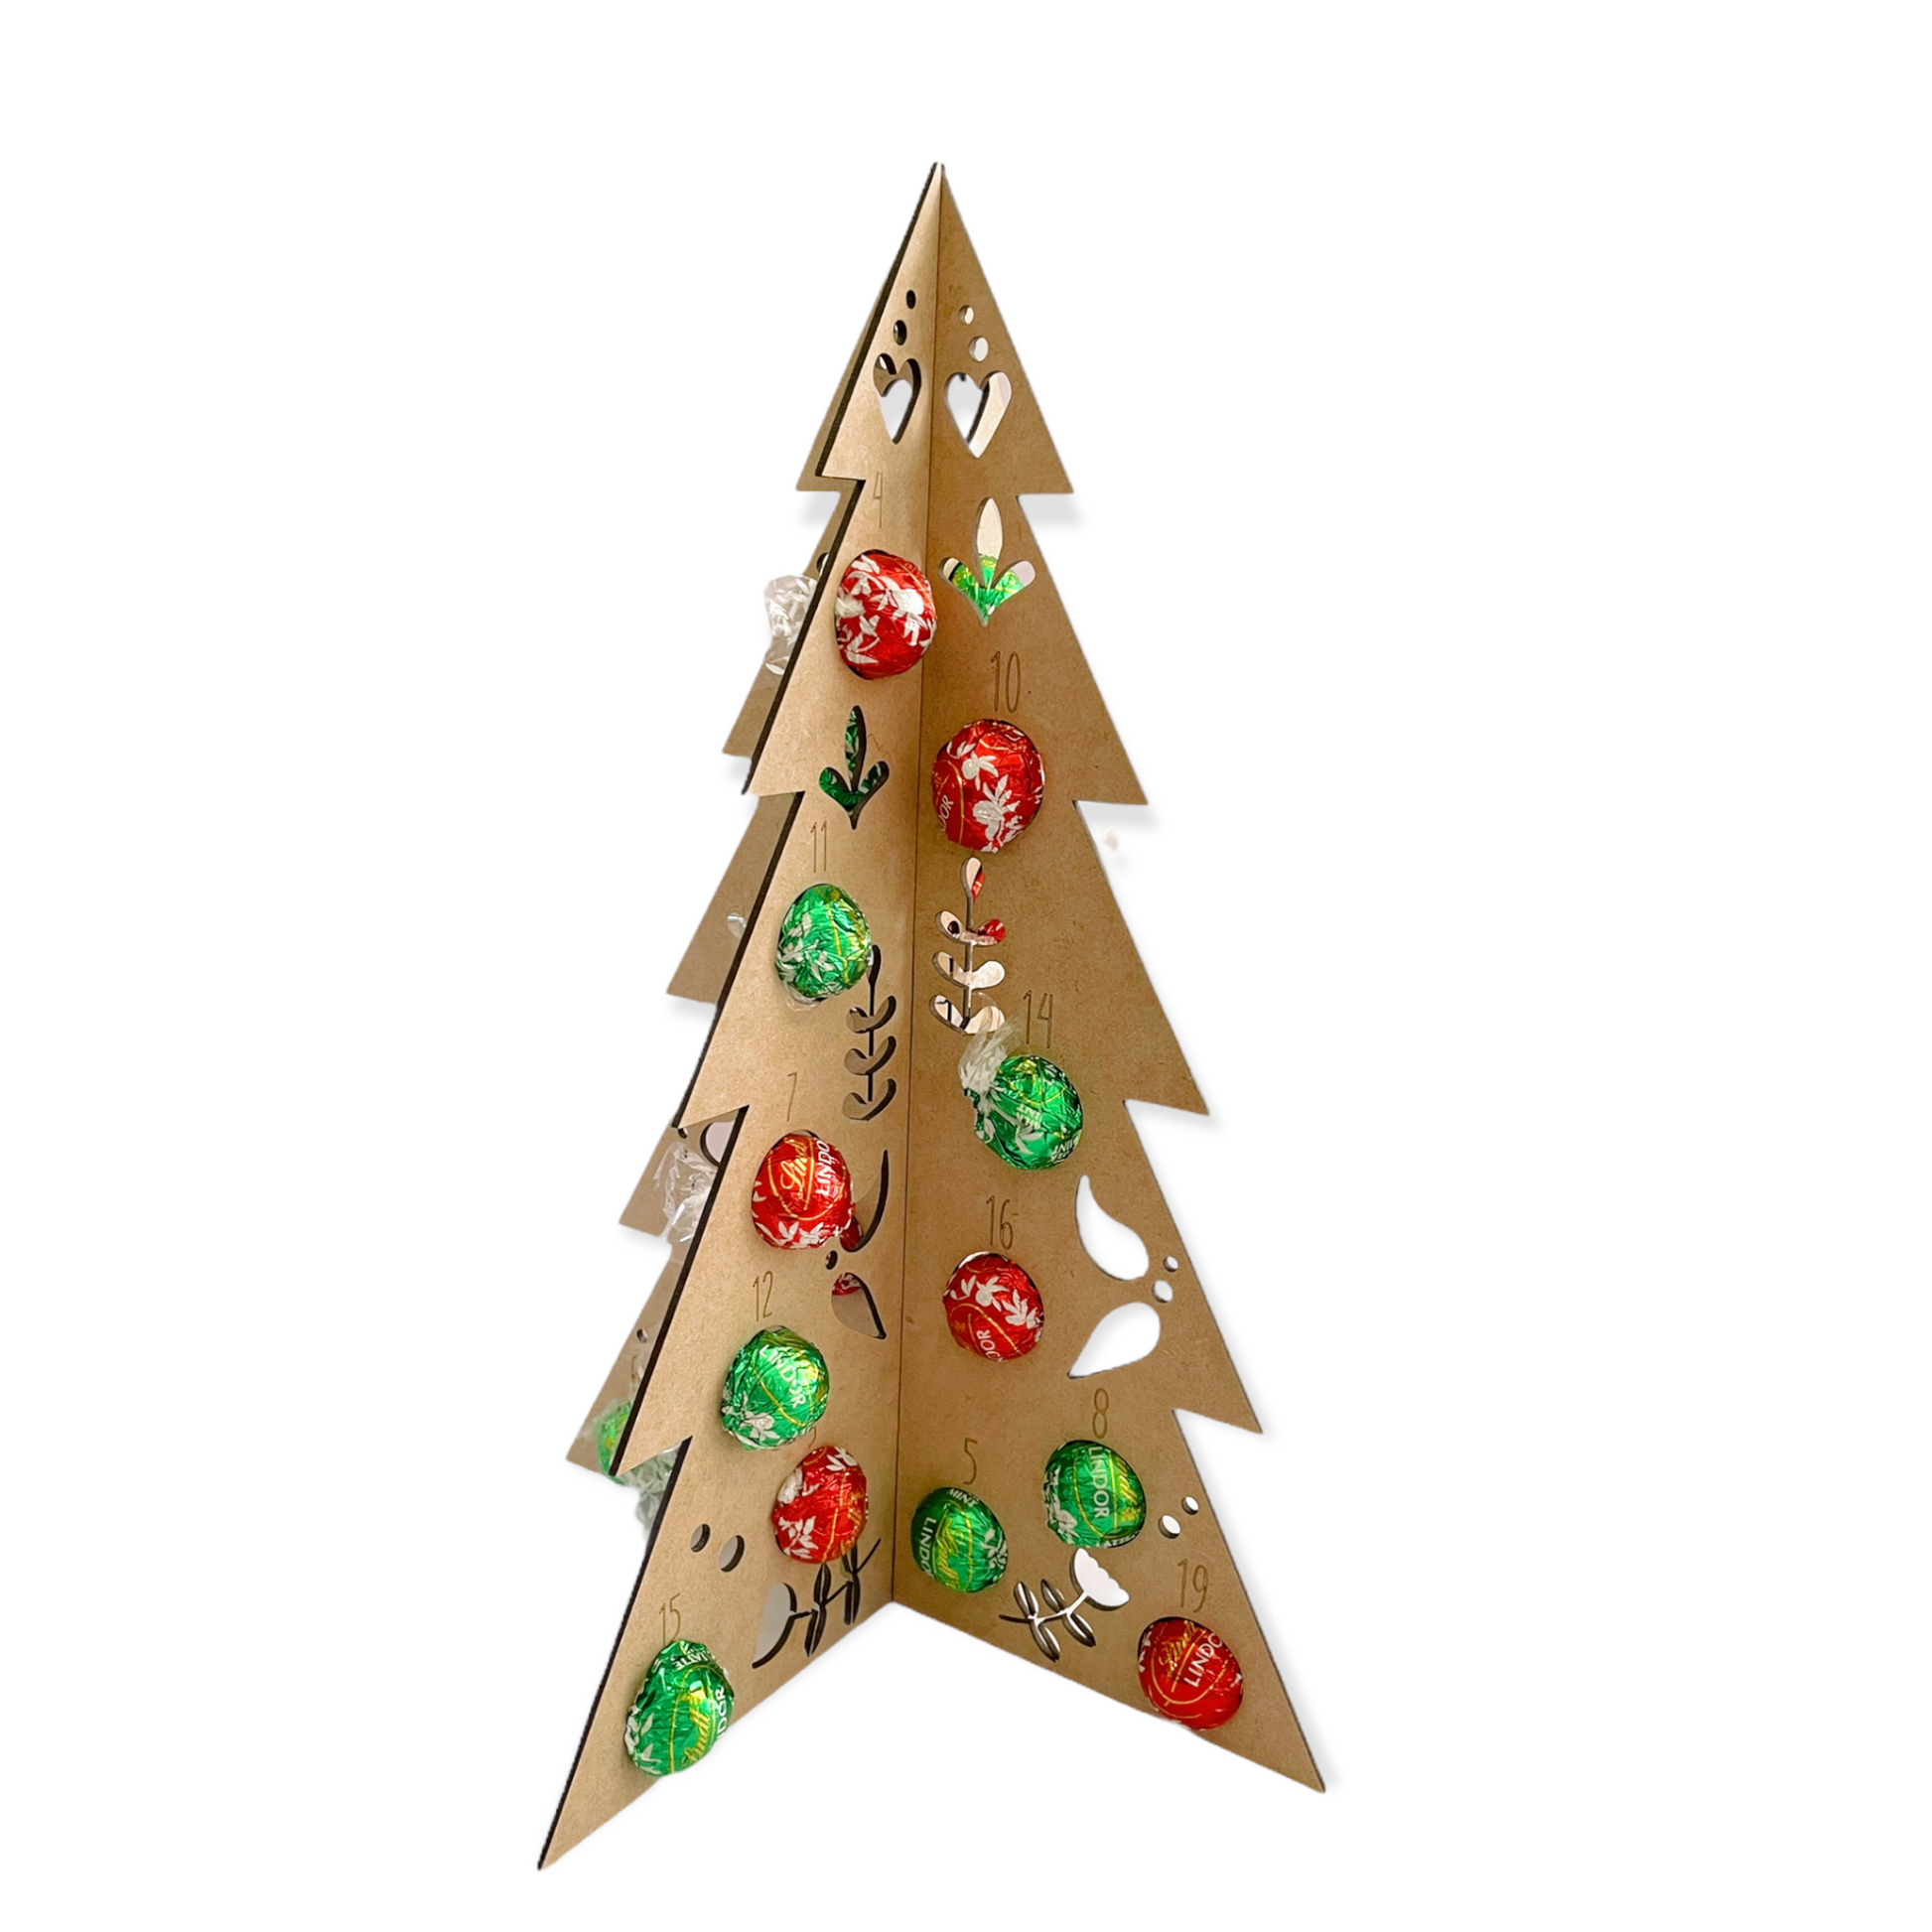 This unique Chocolate Advent Tree is the perfect way to make your holidays even sweeter! It's a wooden tree that easily assembles and contains 24 holes for Lindt chocolates (not included). Count down to Christmas with delicious truffles, making each day leading up to the big celebration even more special. Get creative and pick out your favorite Lindt flavors to fill the tree.